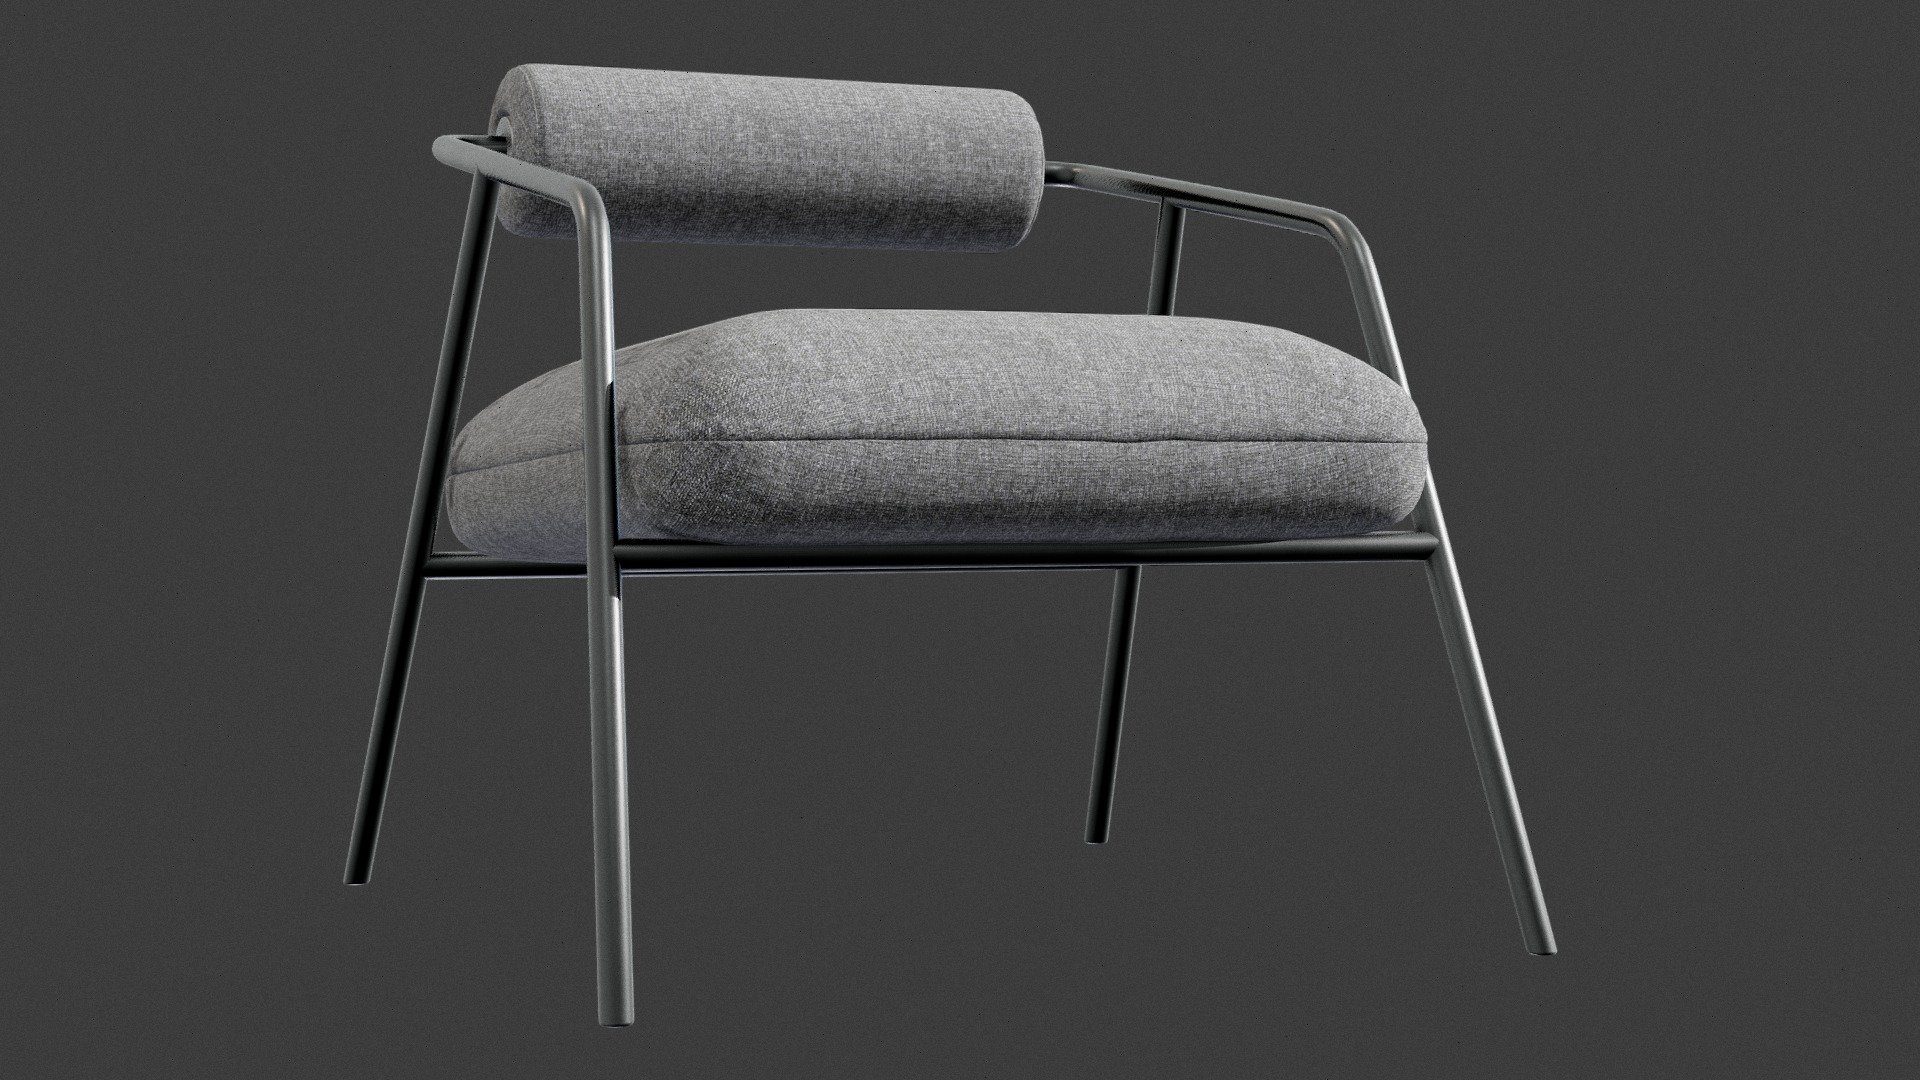 -no plugins/modifiers etc

-model fully UVs unwrapped 

-diffuse texture size: 8192x8192

-model was made in real size

-scene units measurement: millimeters

-dimensions: 66.1 H x 68.9 W x 70.9 D (cm)
 - Cyrus Chair - 3D model by TypicCube 3d model